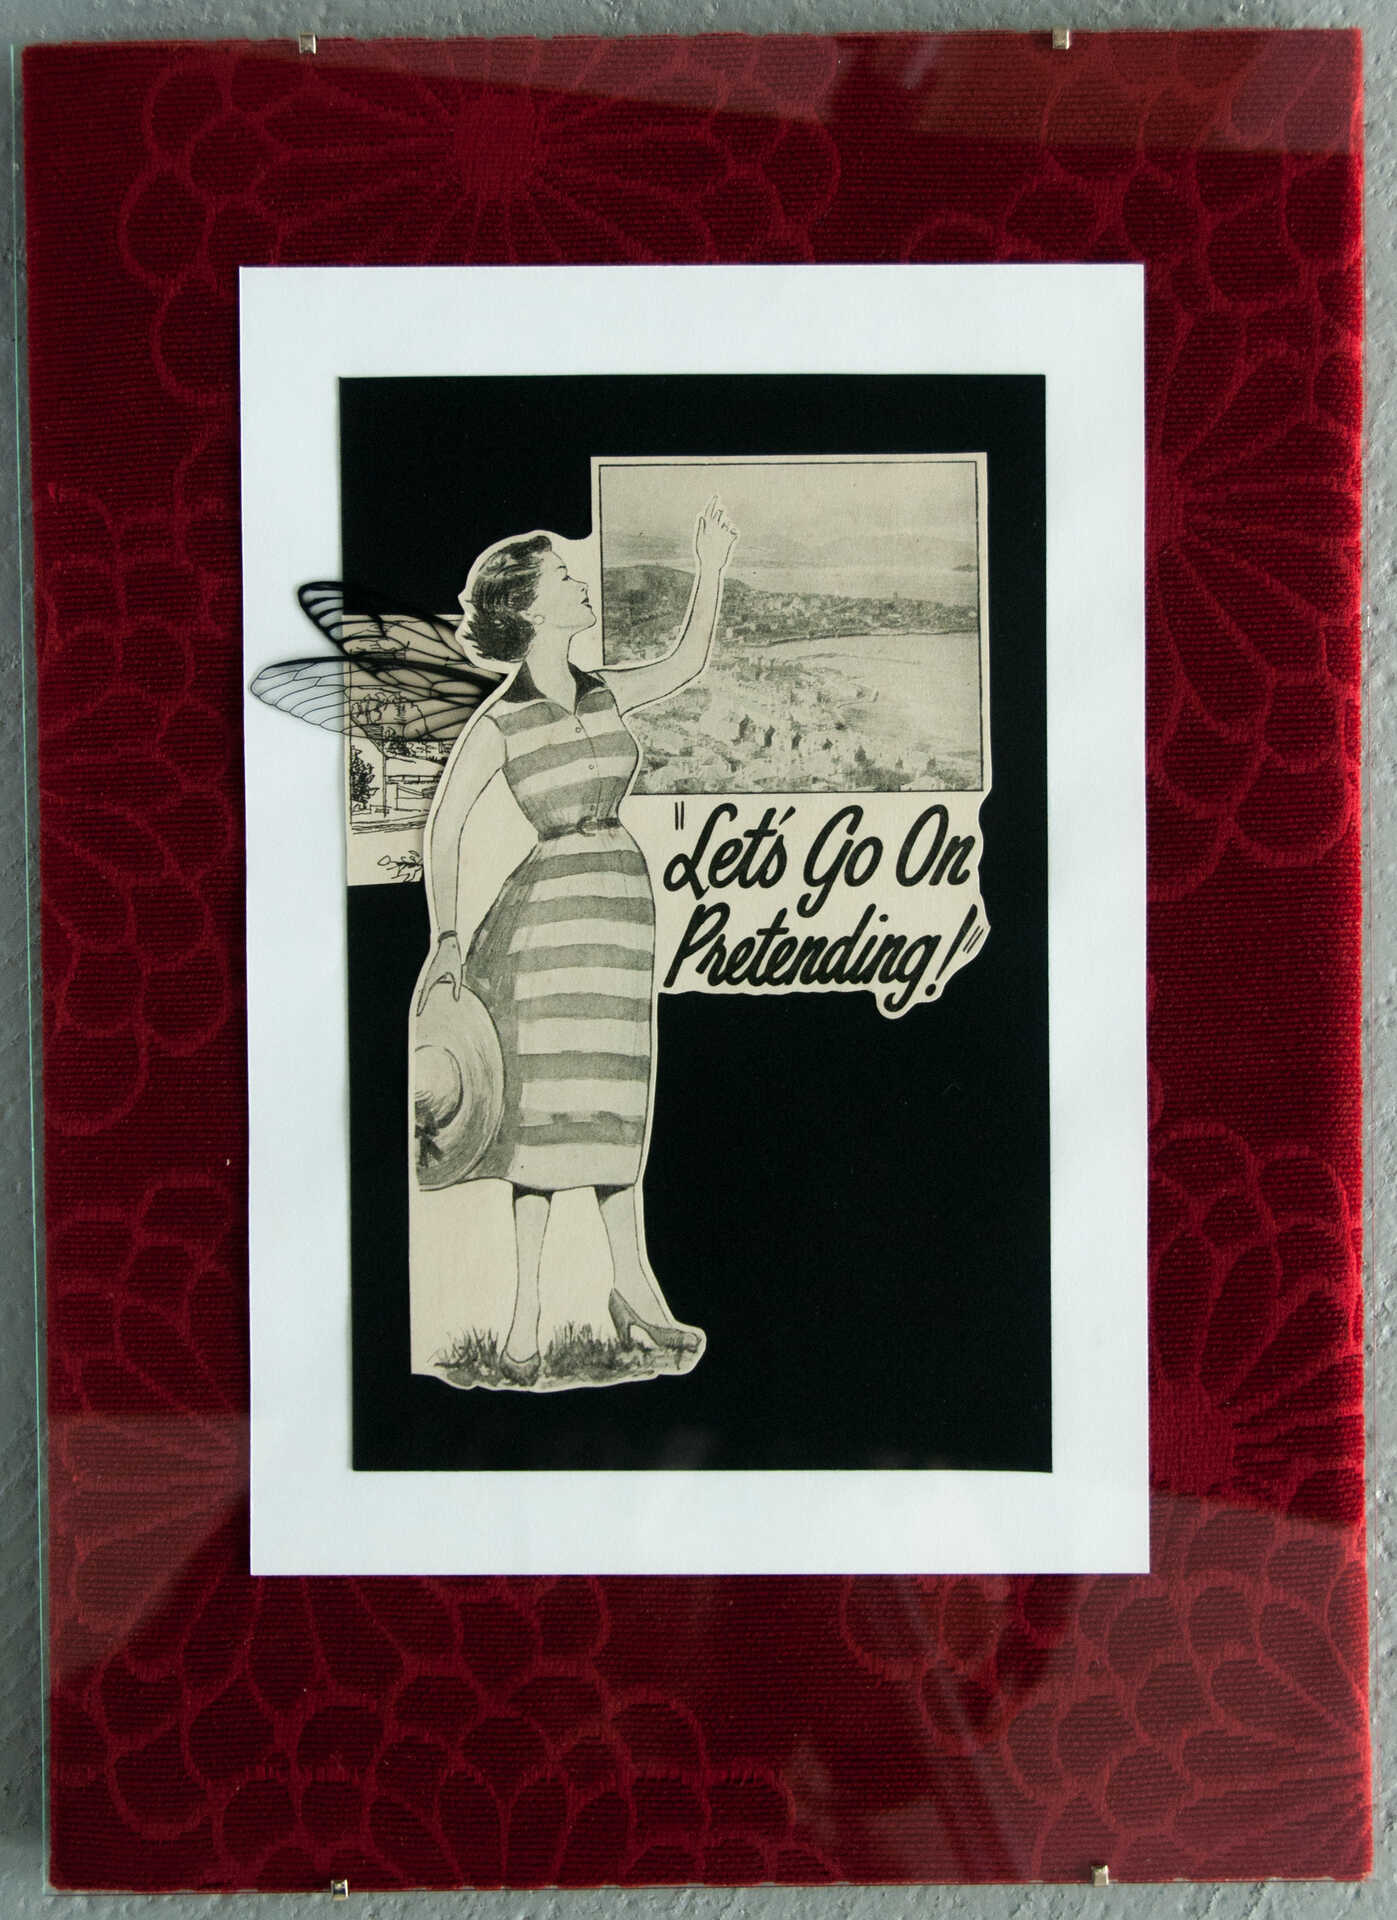 Collage 'Let's Go On Pretending' by Libby Bloxham. A vintage book illustration is layered over black and white card and framed by rich red vintage fabric with a floral texture. The illustration shows a woman in a sundress, holding a sunhat in one hand and waving to something in the distance, with an inset panel depicting a scenic coastal landscape behind her. Acetate insect wings have been added to the woman's back.